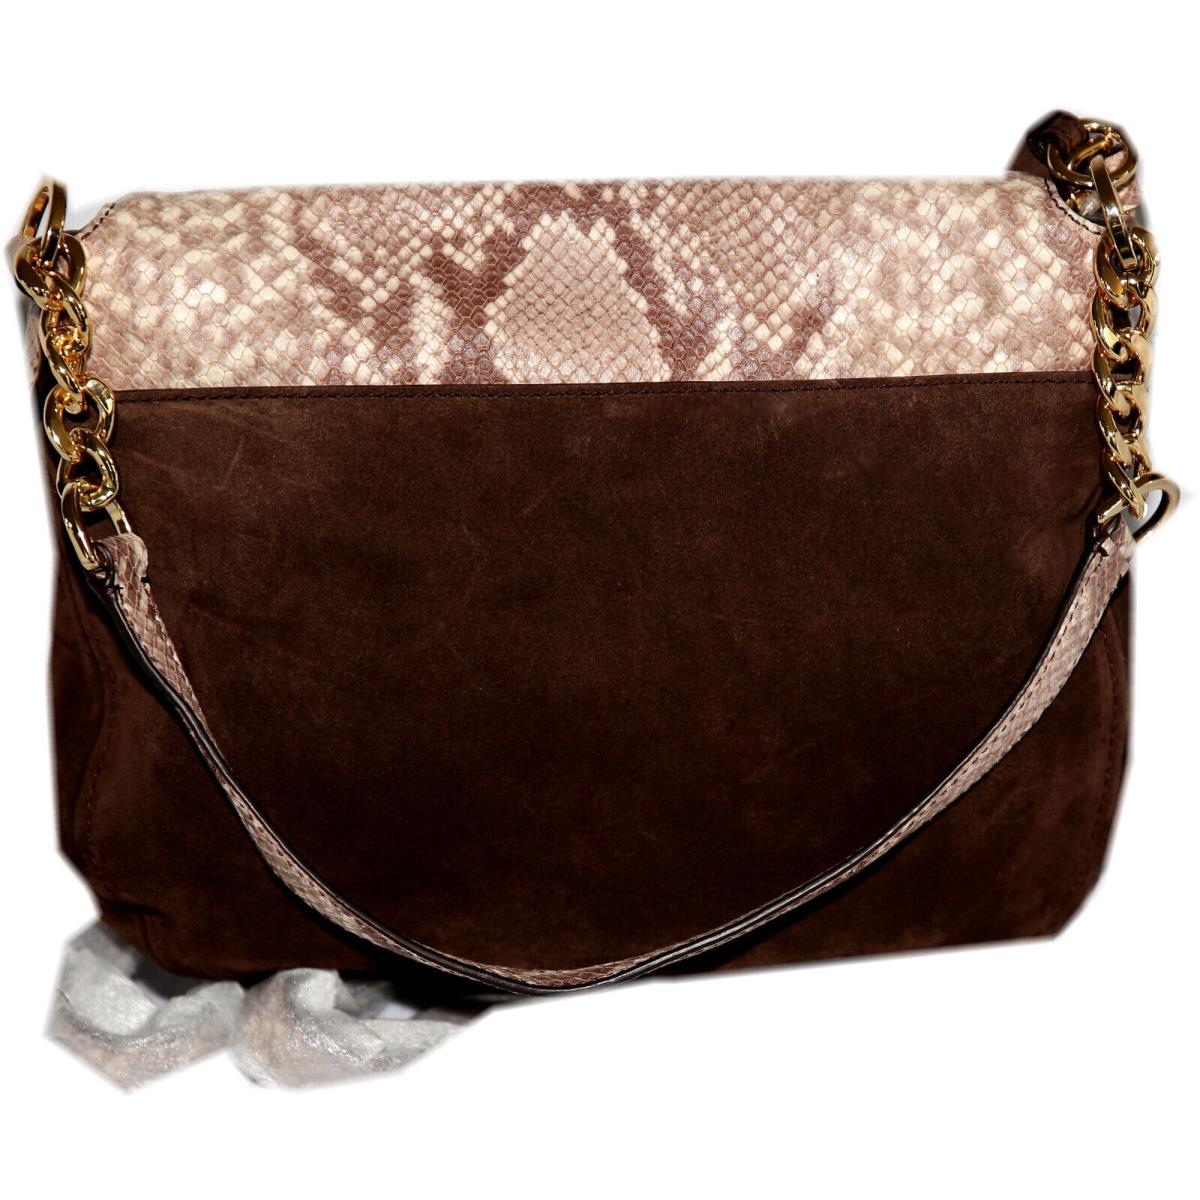 Kors Snake Emboss Leather / Suede Bedford Handbag - Exterior: Tan Ivory Snake Embossed Leather / Rich Brown Suede, Lining: Signature Beige fabric